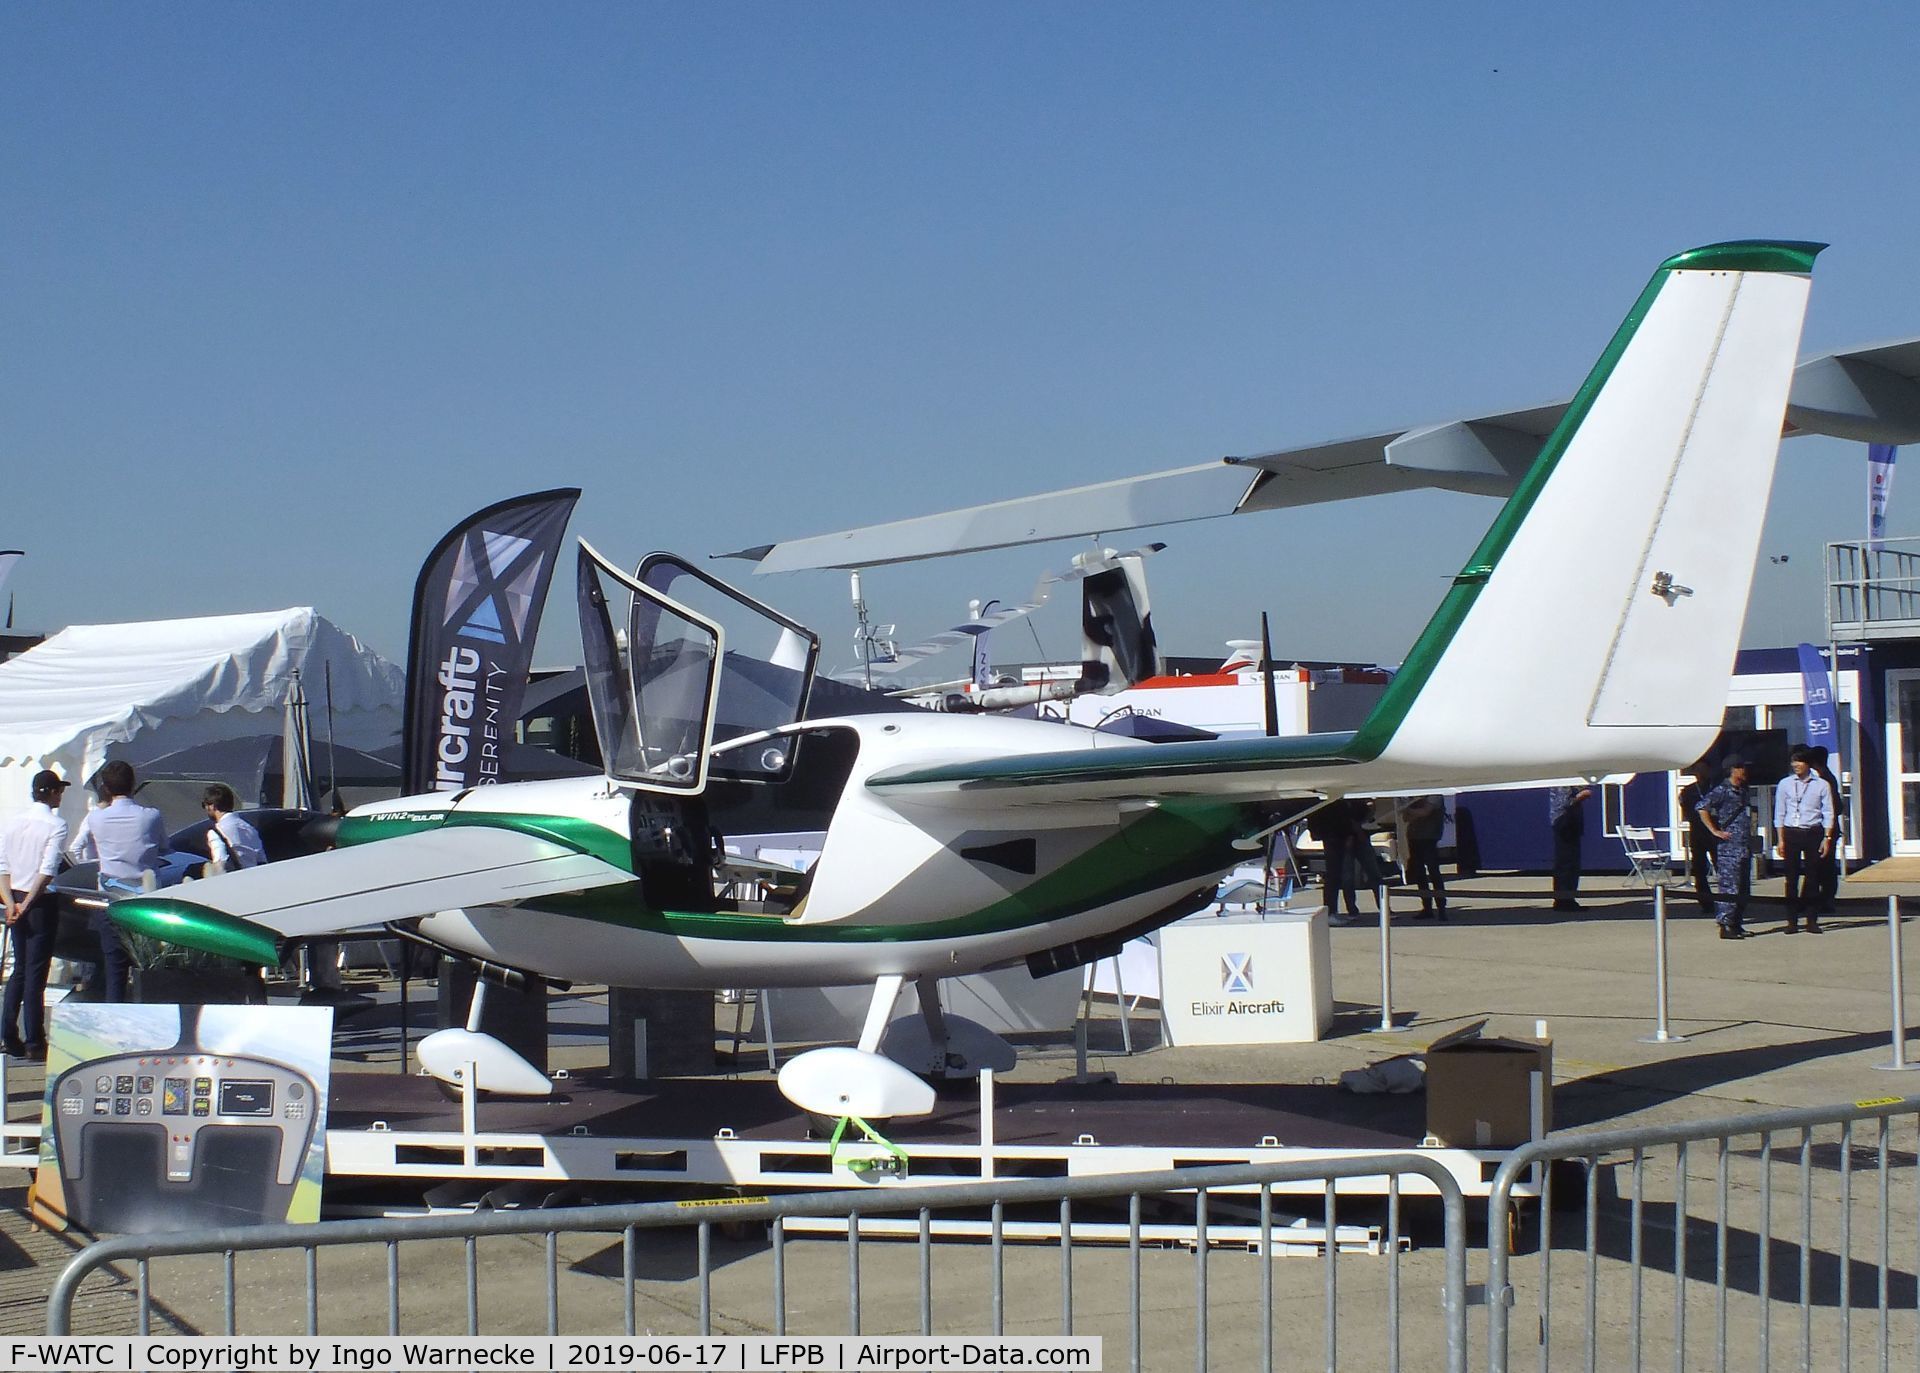 F-WATC, 2009 Eulair Twin 2 C/N unknown_f-watc, Eulair Twin 2 (formerly Aeronix Airelle) at the Aerosalon 2019, Paris